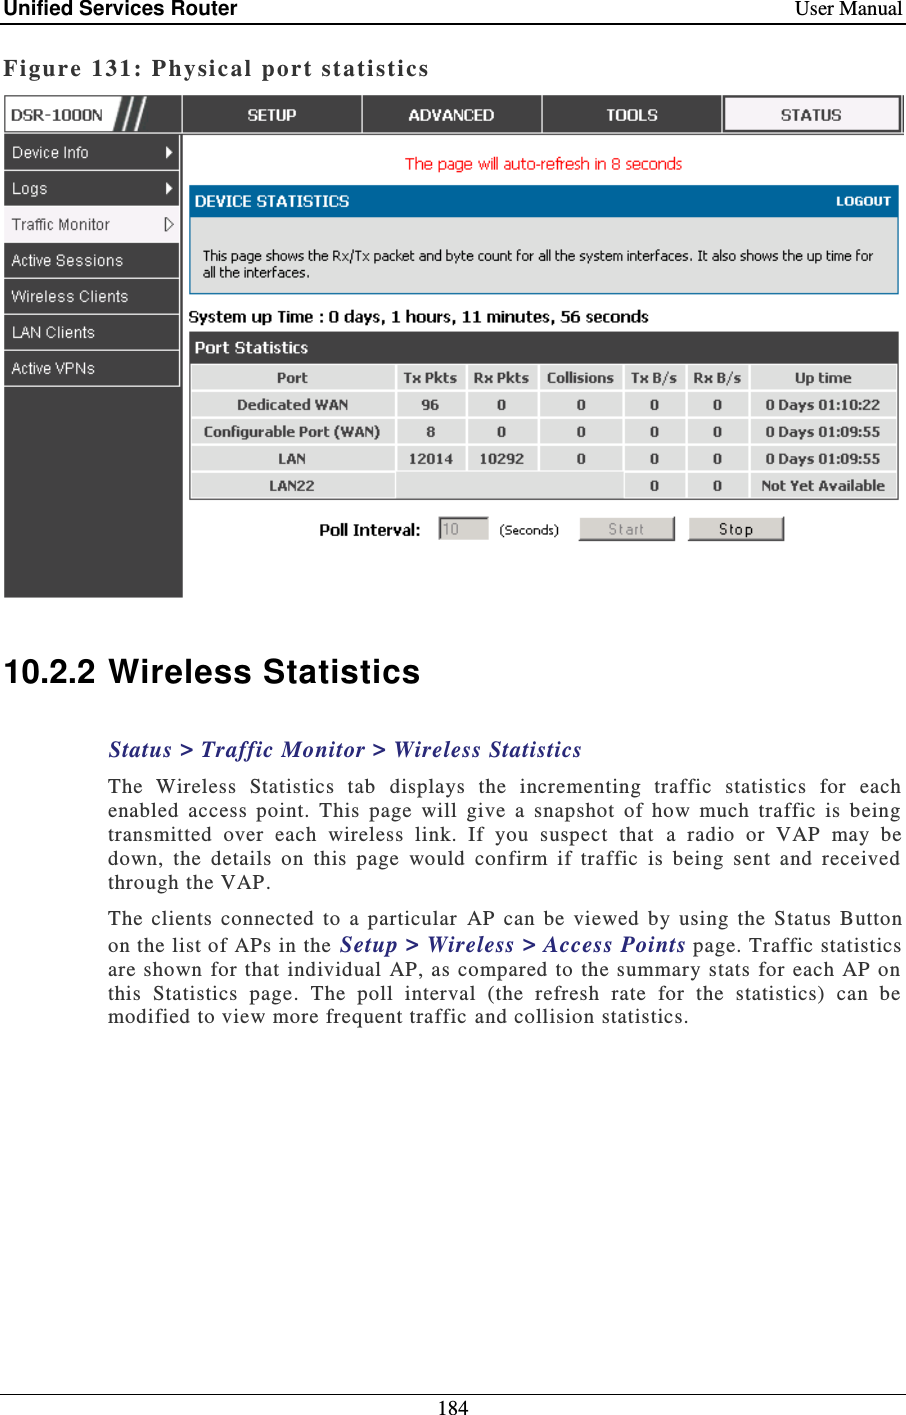 Unified Services Router    User Manual 184  Figure 131: P hysical  port statistics    10.2.2 Wireless Statistics Status &gt; Traffic Monitor &gt; Wireless Statistics The  Wireless  Statistics  tab  displays  the  incrementing  traffic  statistics  for  each enabled  access  point.  This  page  will  give  a  snapshot  of  how  much  traffic  is  being transmitted  over  each  wireless  link.  If  you  suspect  that   a  radio  or  VAP  may  be down,  the  details  on  this  page  would  confirm  if  traffic  is  being  sent  and  received through the VAP.  The  clients  connected  to  a  particular  AP  can  be  viewed  by  using  the  Status  Button on the list of APs in the Setup &gt; Wireless &gt; Access Points page. Traffic statistics are shown  for that individual  AP,  as compared to  the summary stats  for each  AP on this  Statistics  page.  The  poll  interval  (the  refresh  rate  for  the  statistics)  can  be modified to view more frequent traffic and collision statistics. 